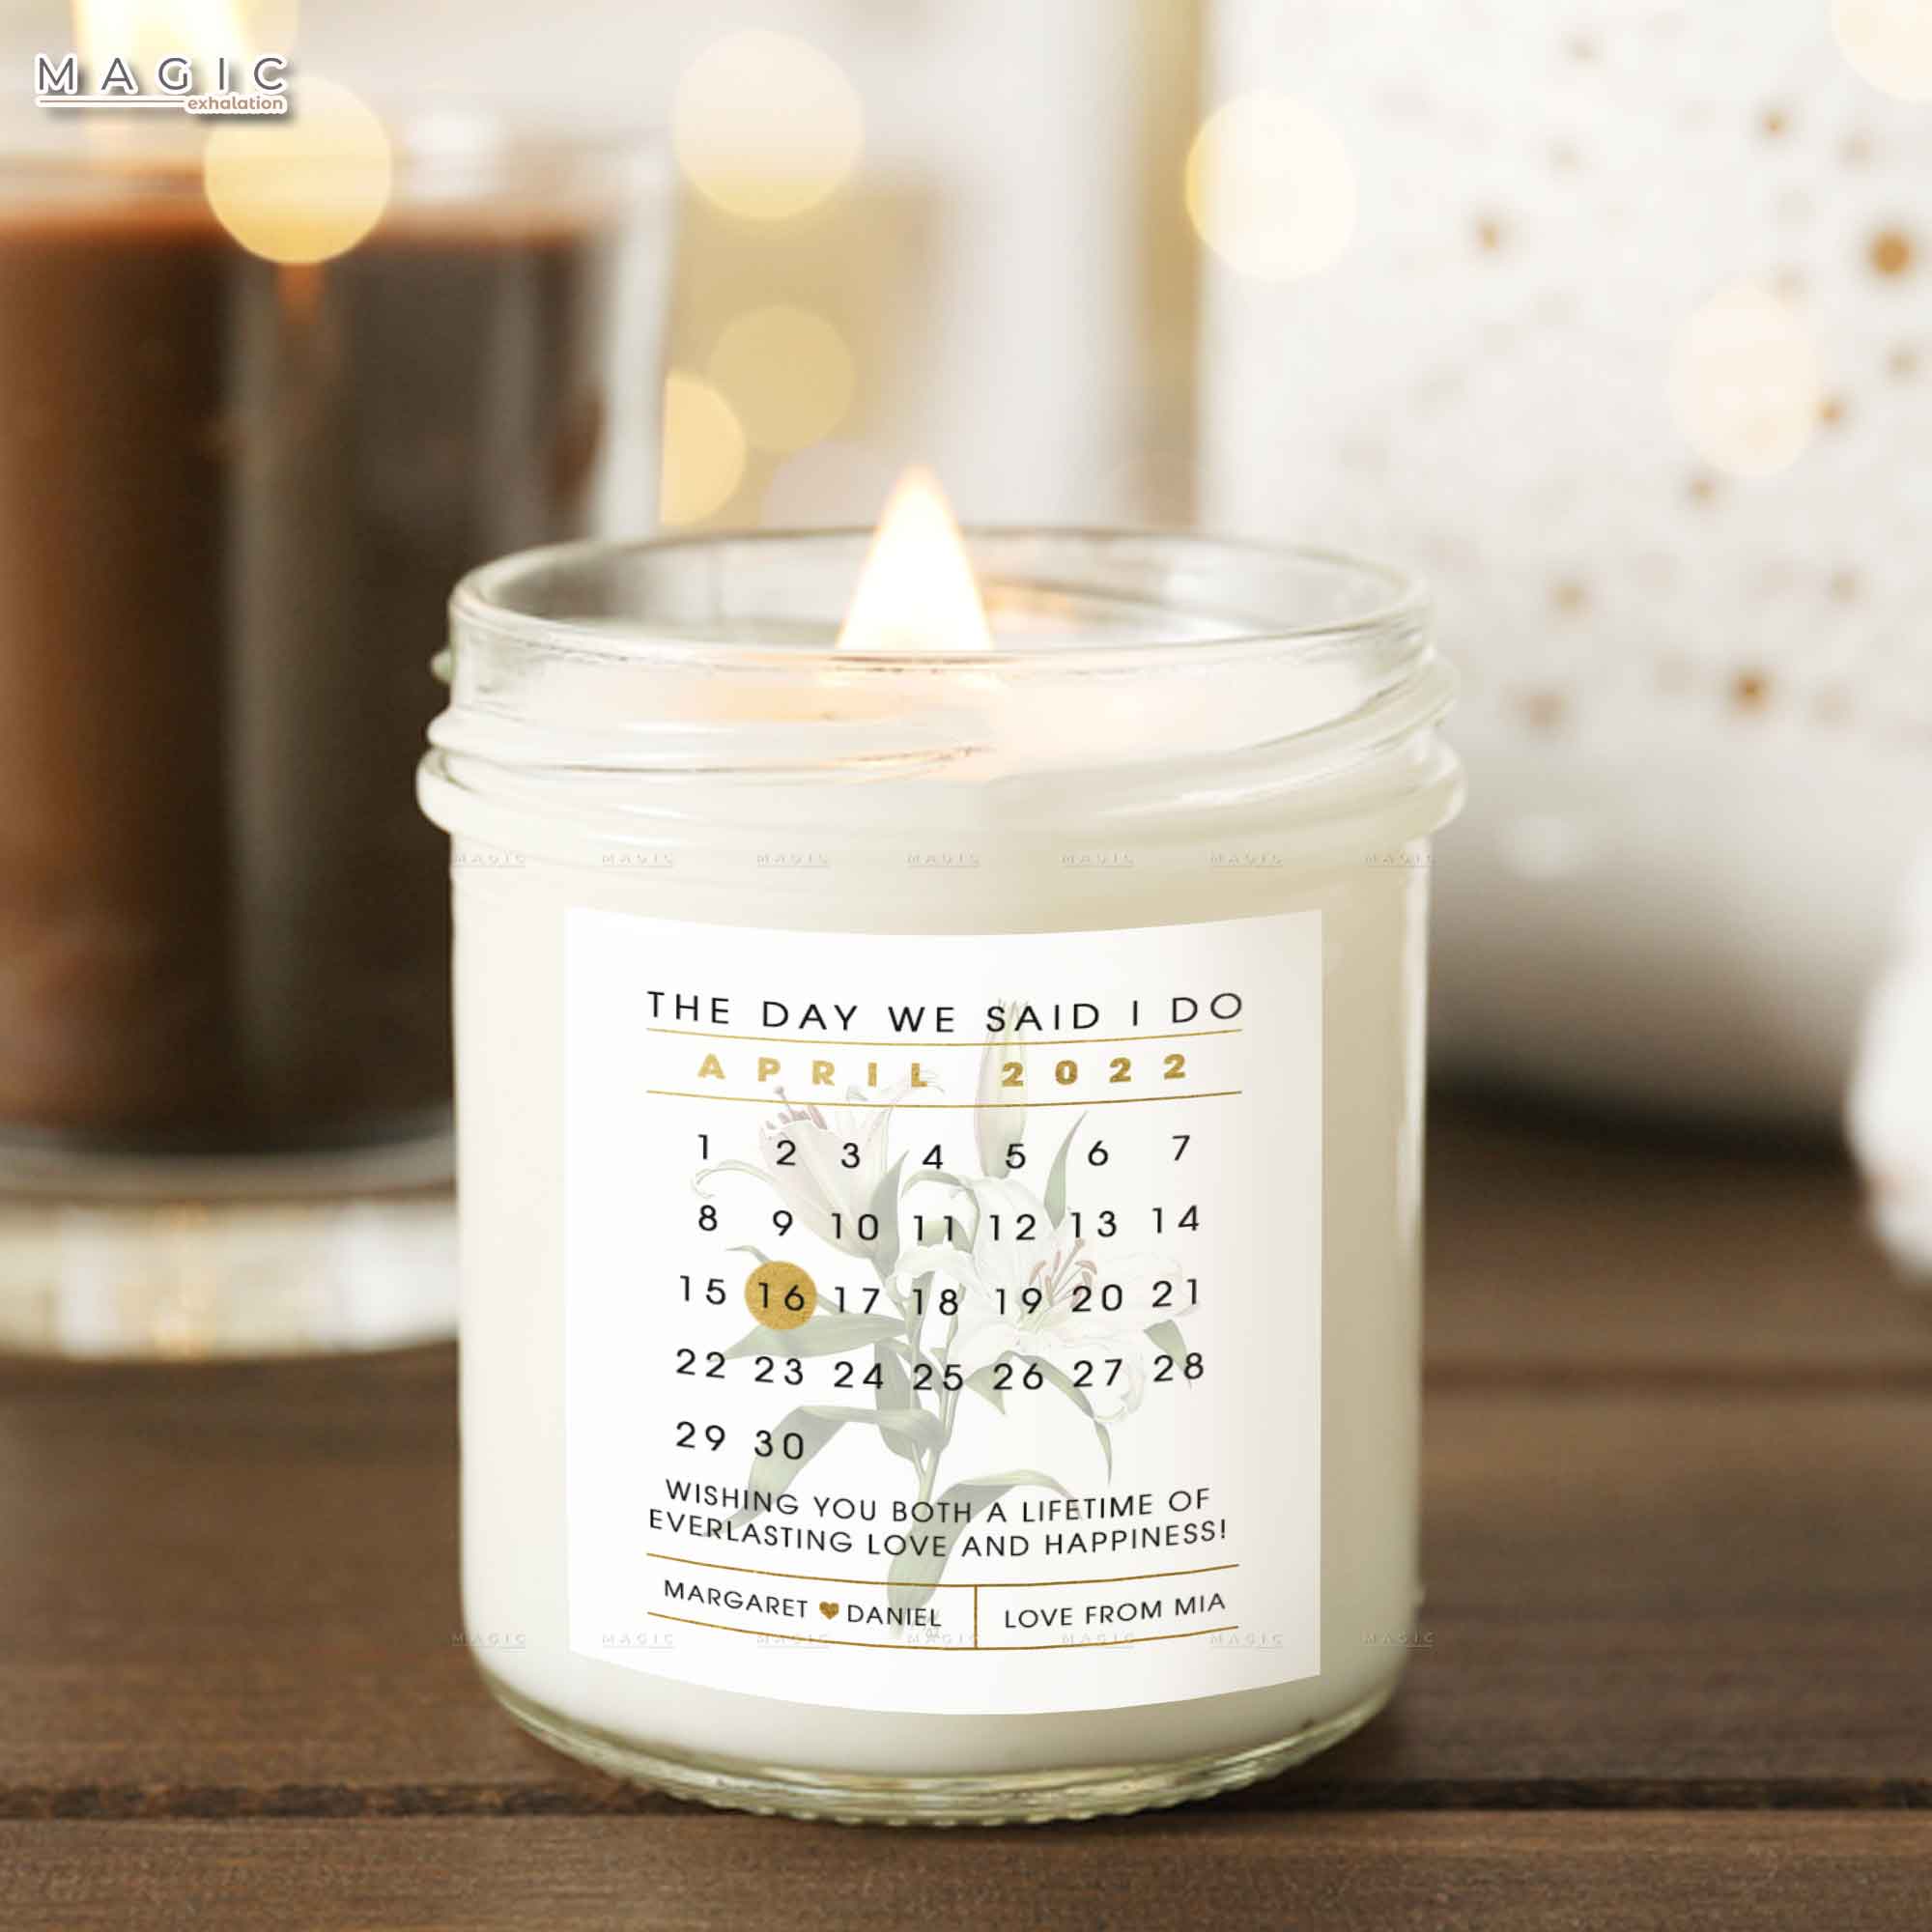 Wedding Day Candle Gift For Groom and Bride, Custom Calendar Candle Bridal Shower Gift, Scented Candles Wedding Gift, Wedding Present Soy Wax Candle